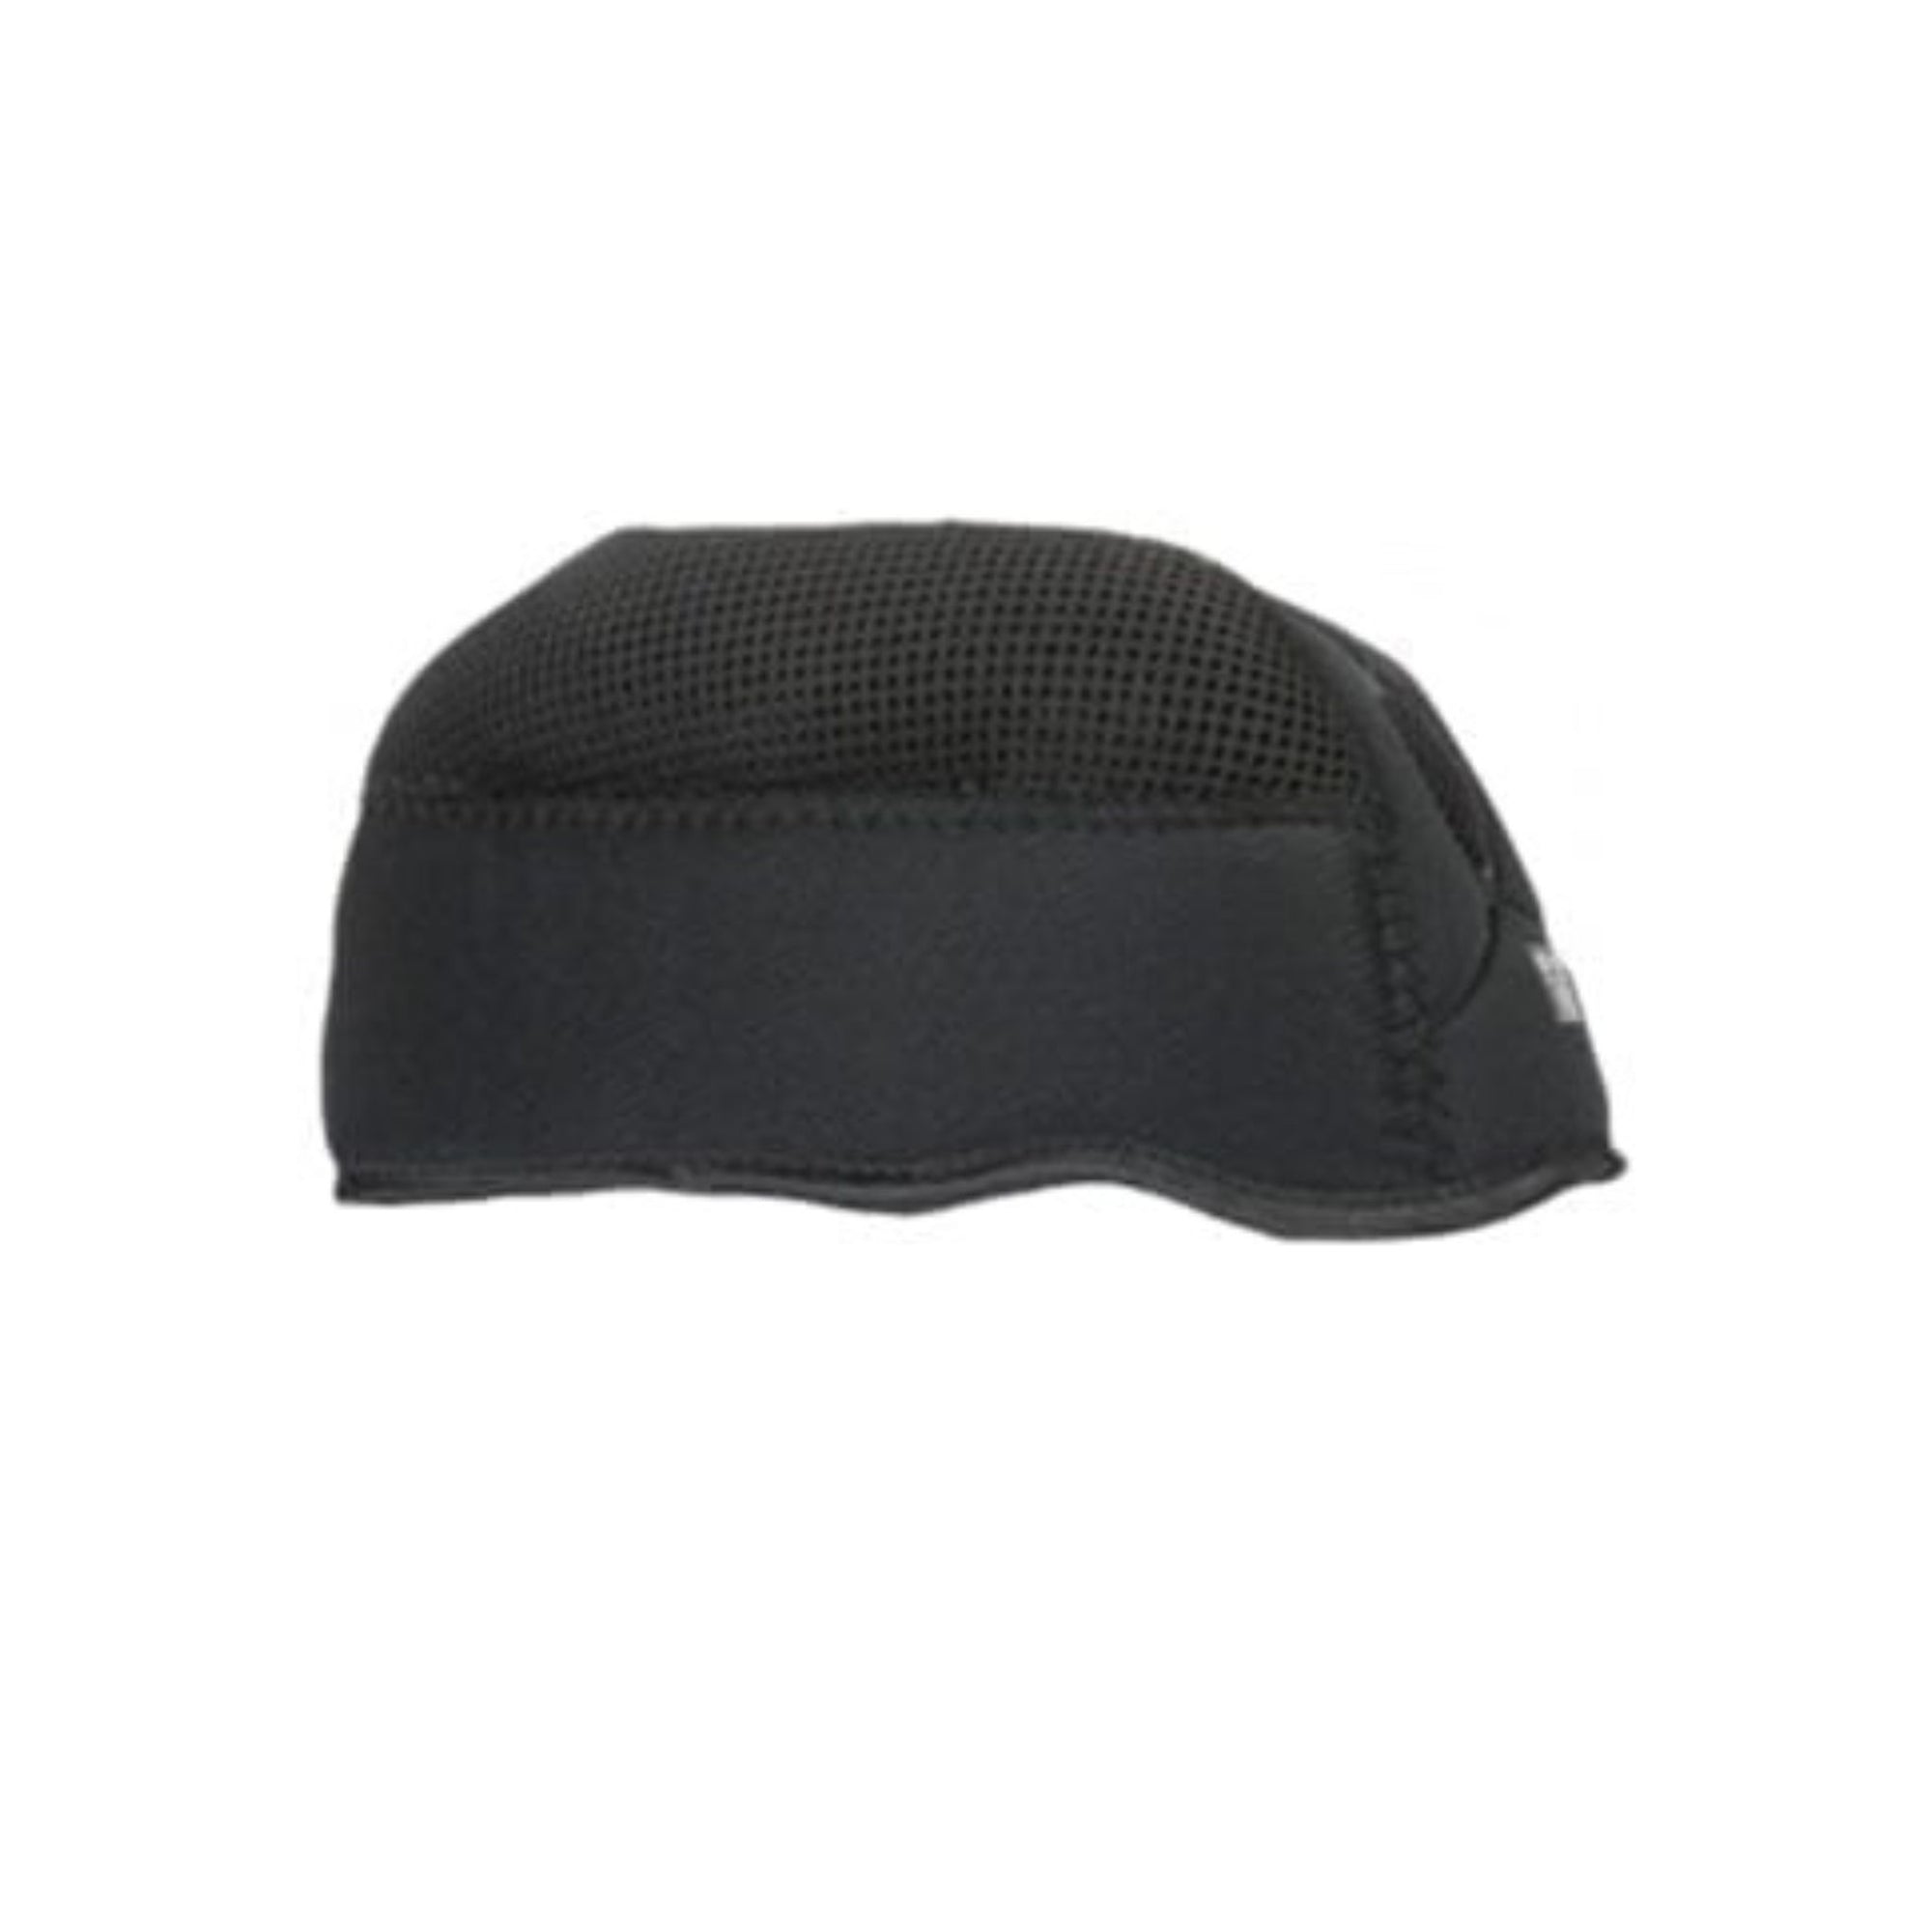 Black shaped helmet liner with black stitching and ventilation holes across top.